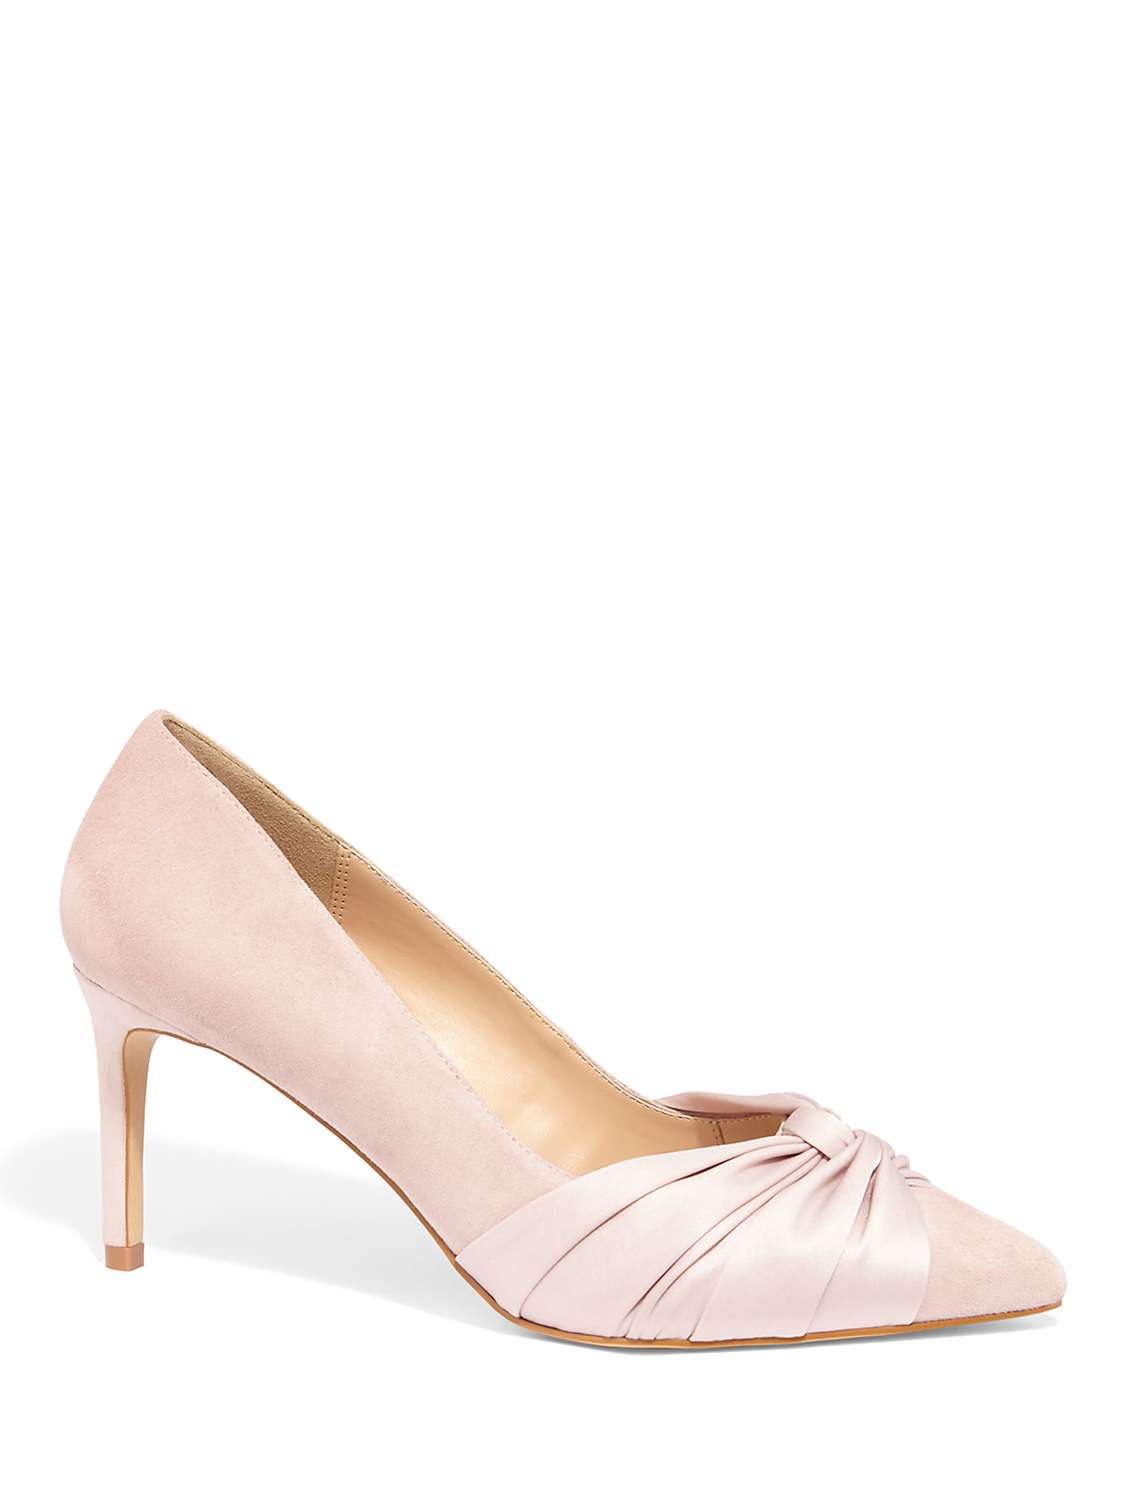 Phase Eight Kendal Court Shoes, Antique Rose at John Lewis & Partners